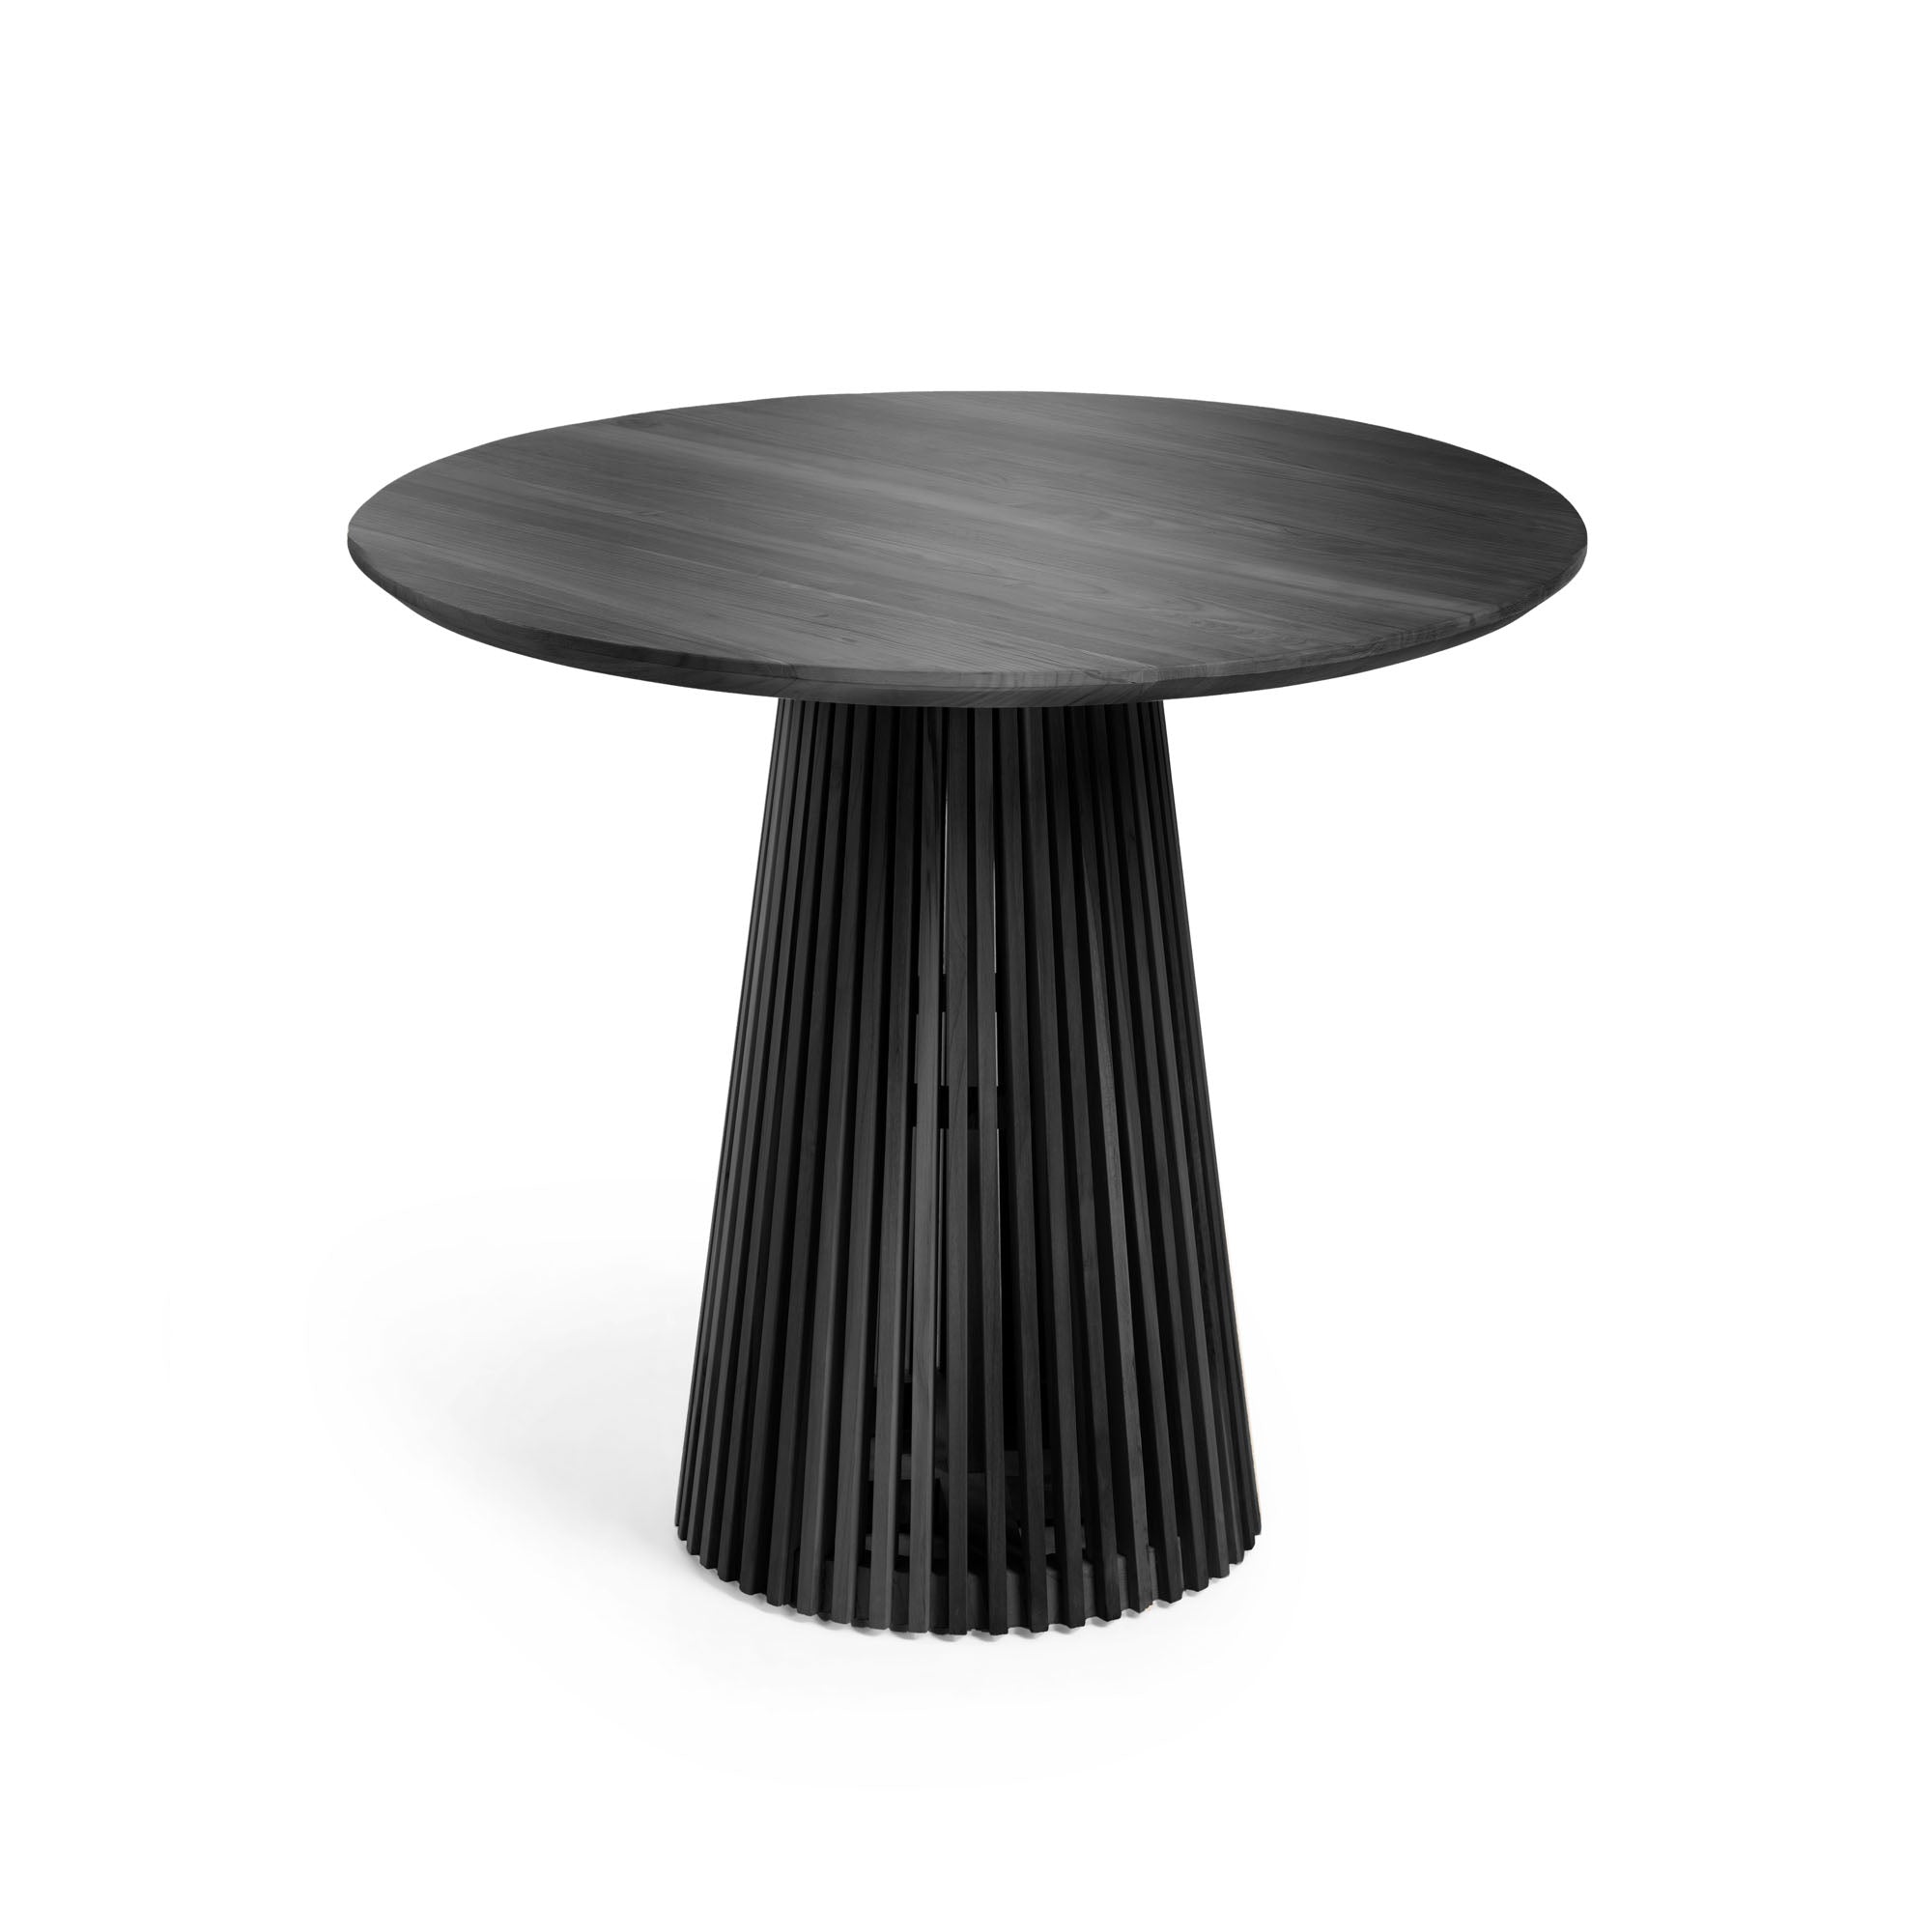 Jeanette round solid white cedar wood table in black, Ø 90 cm